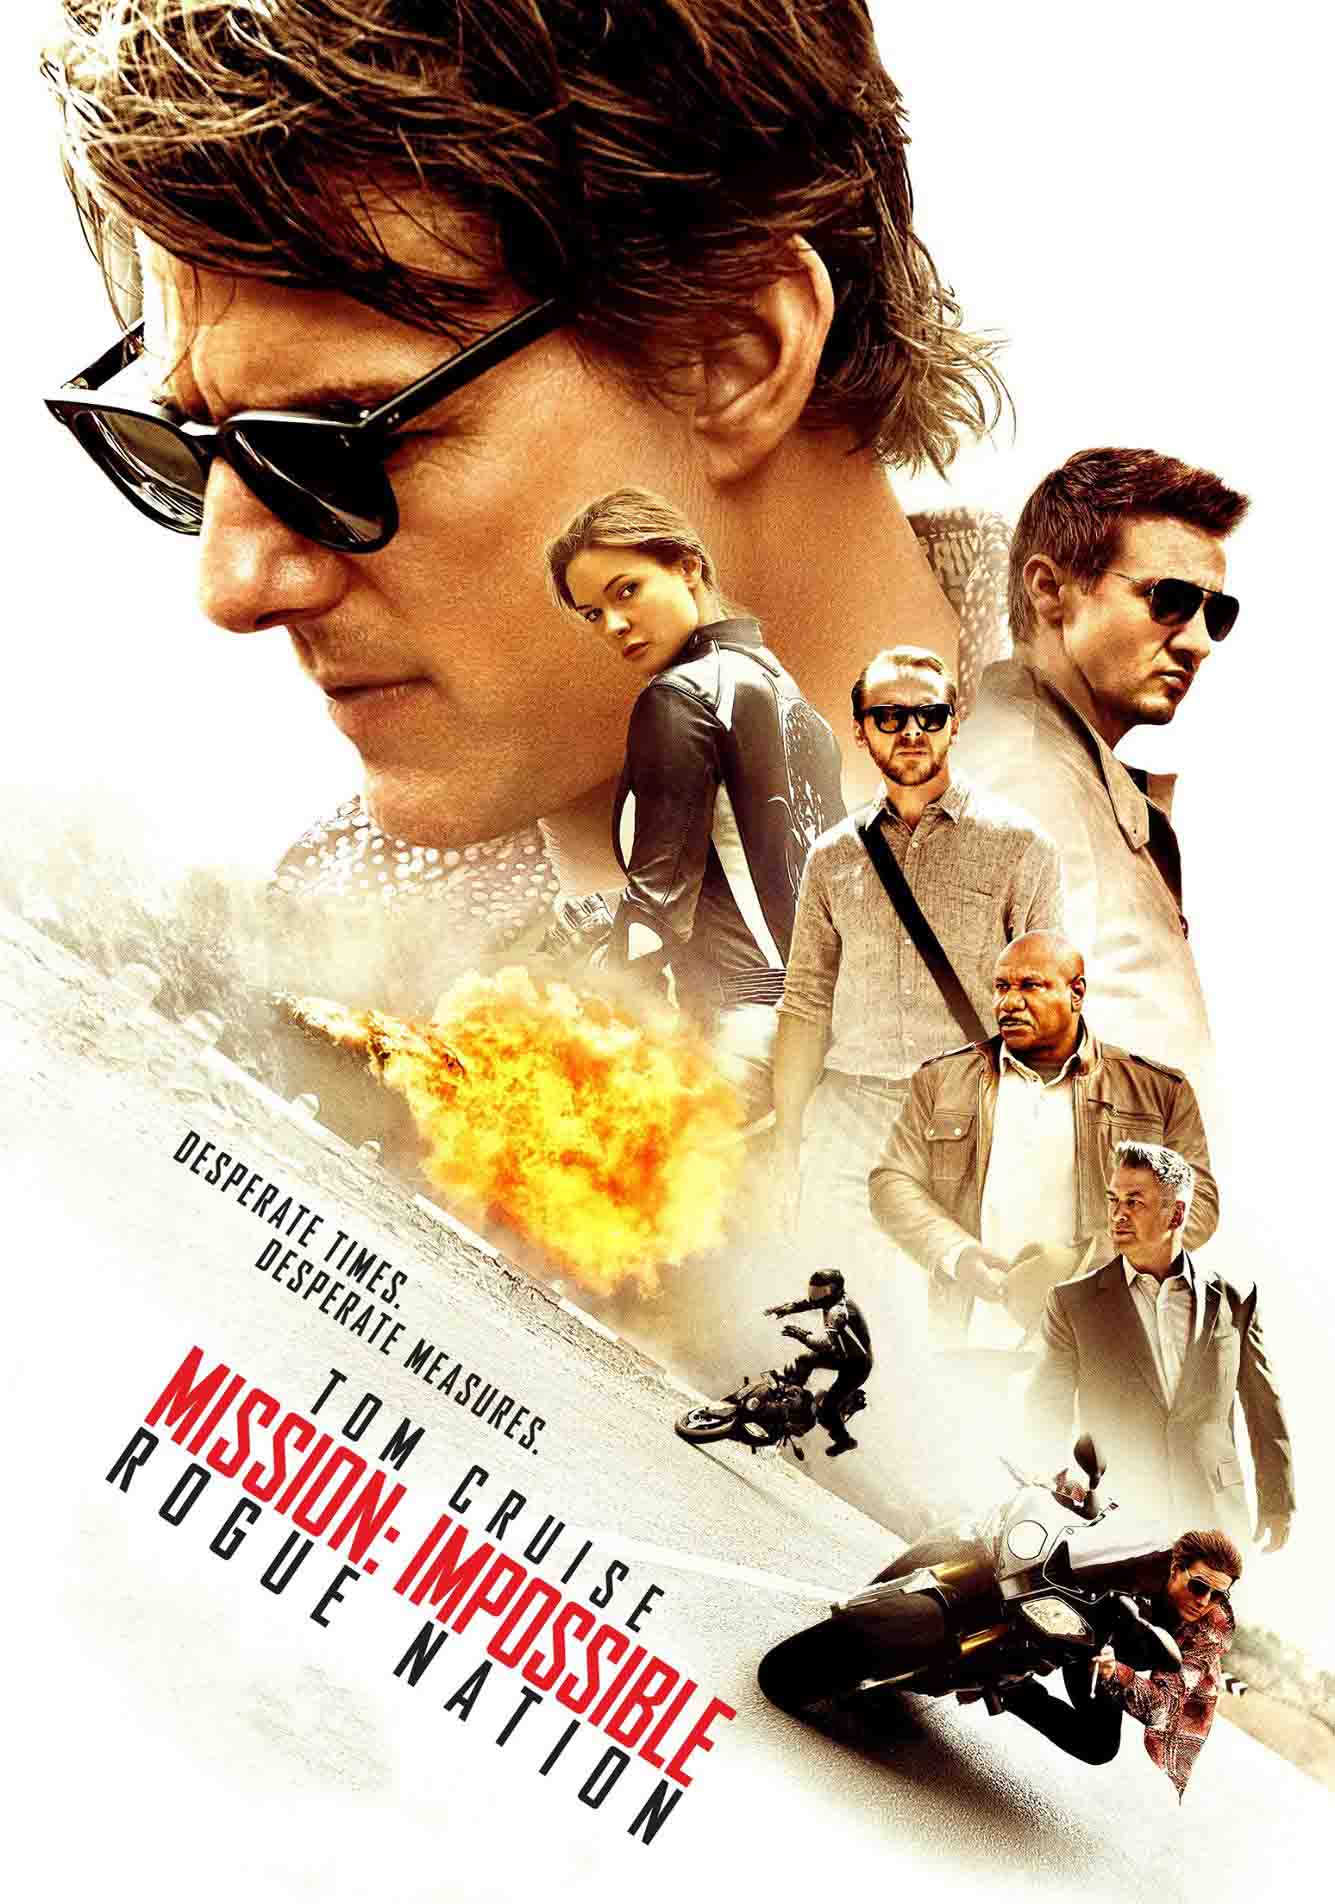 Mission: Impossible 5 - Rogue Nation 2015